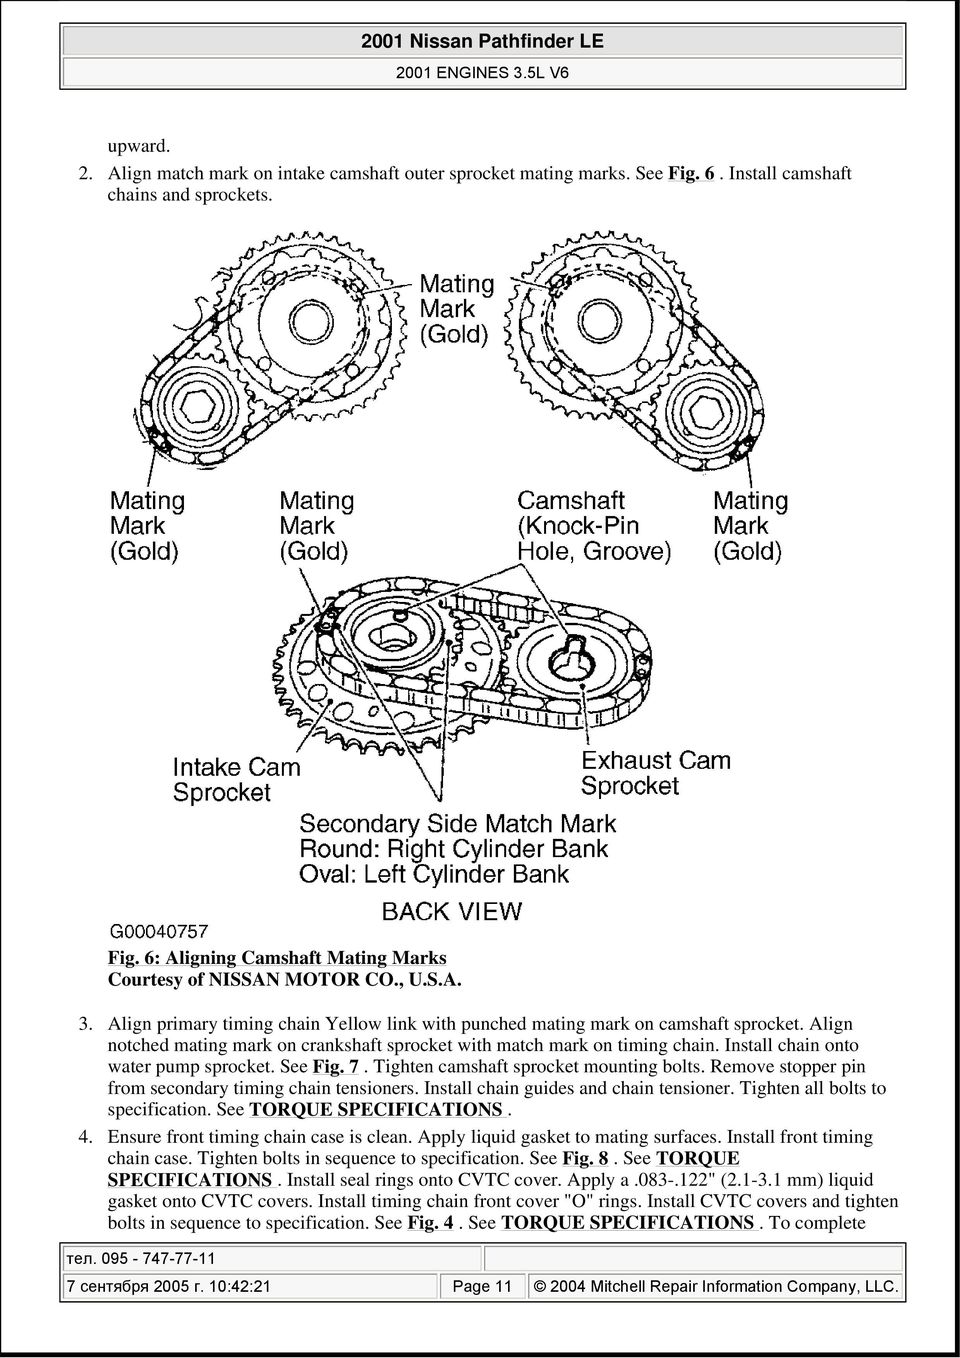 Install chain onto water pump sprocket. See Fig. 7. Tighten camshaft sprocket mounting bolts. Remove stopper pin from secondary timing chain tensioners. Install chain guides and chain tensioner.